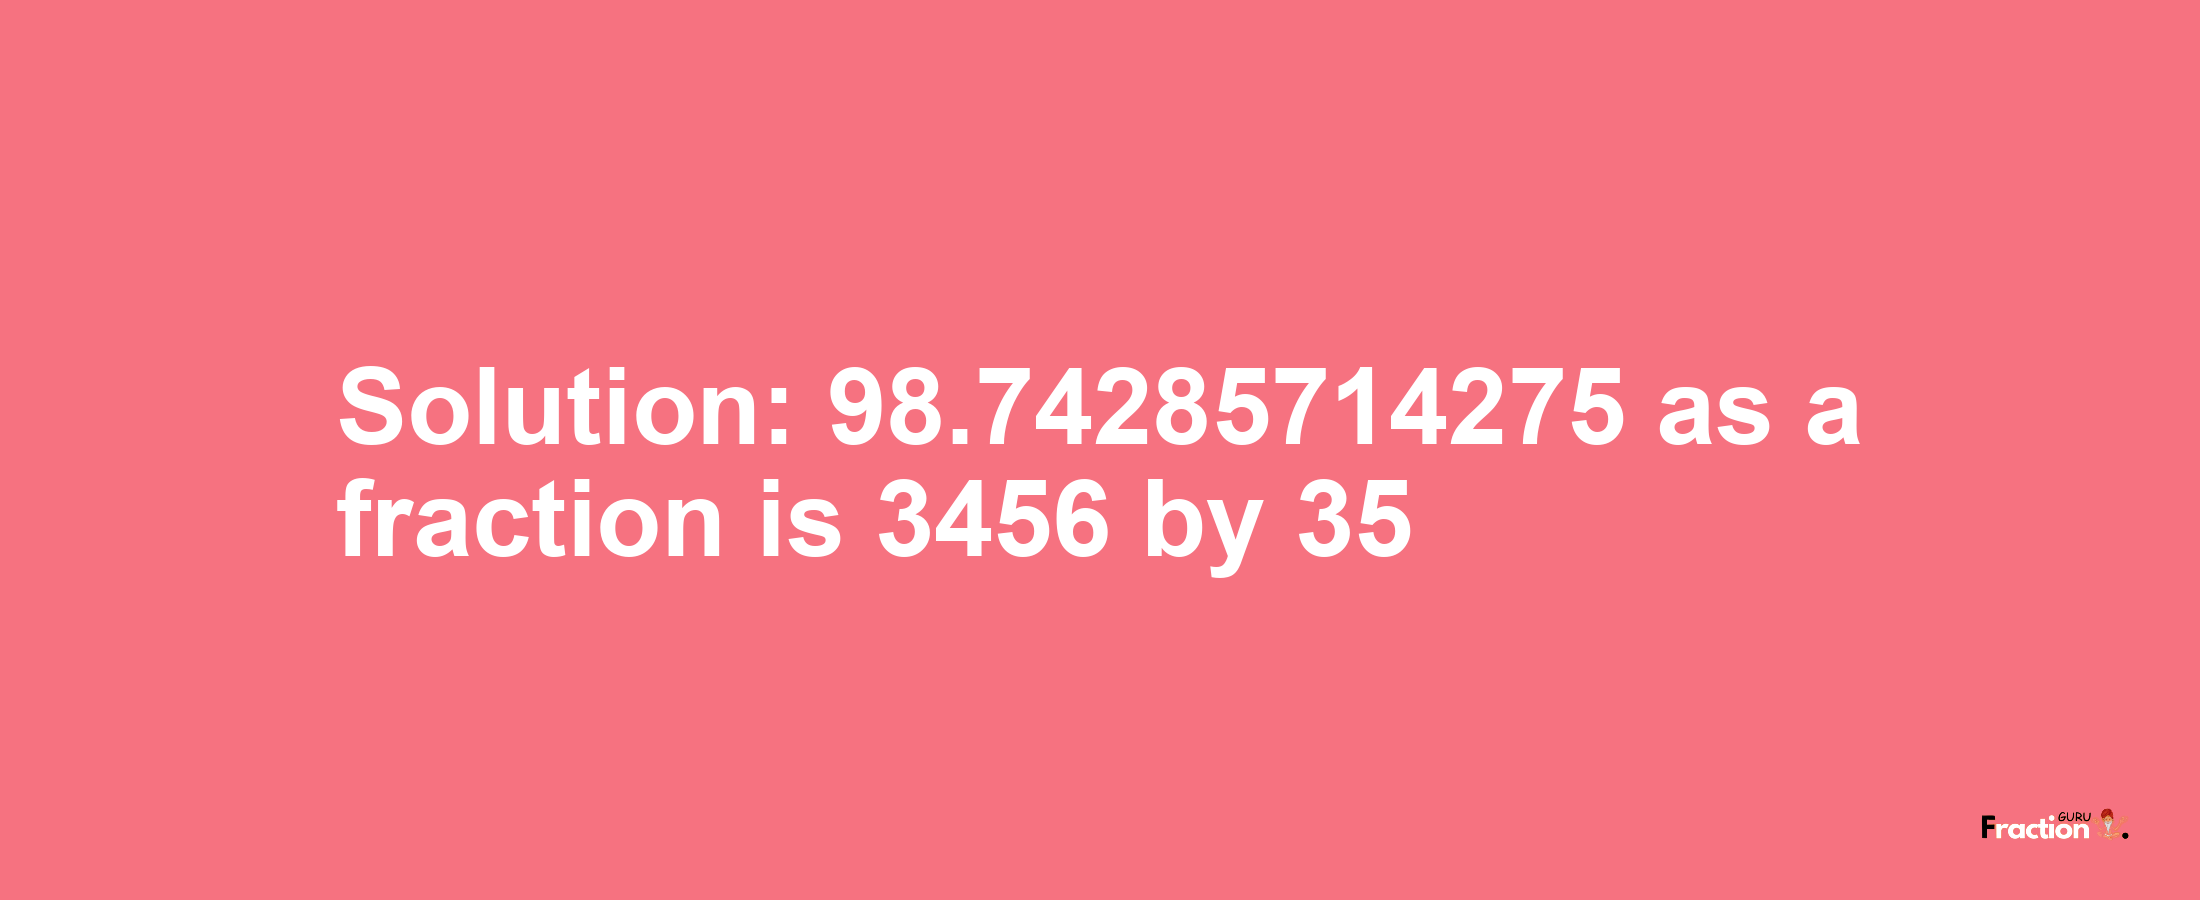 Solution:98.74285714275 as a fraction is 3456/35